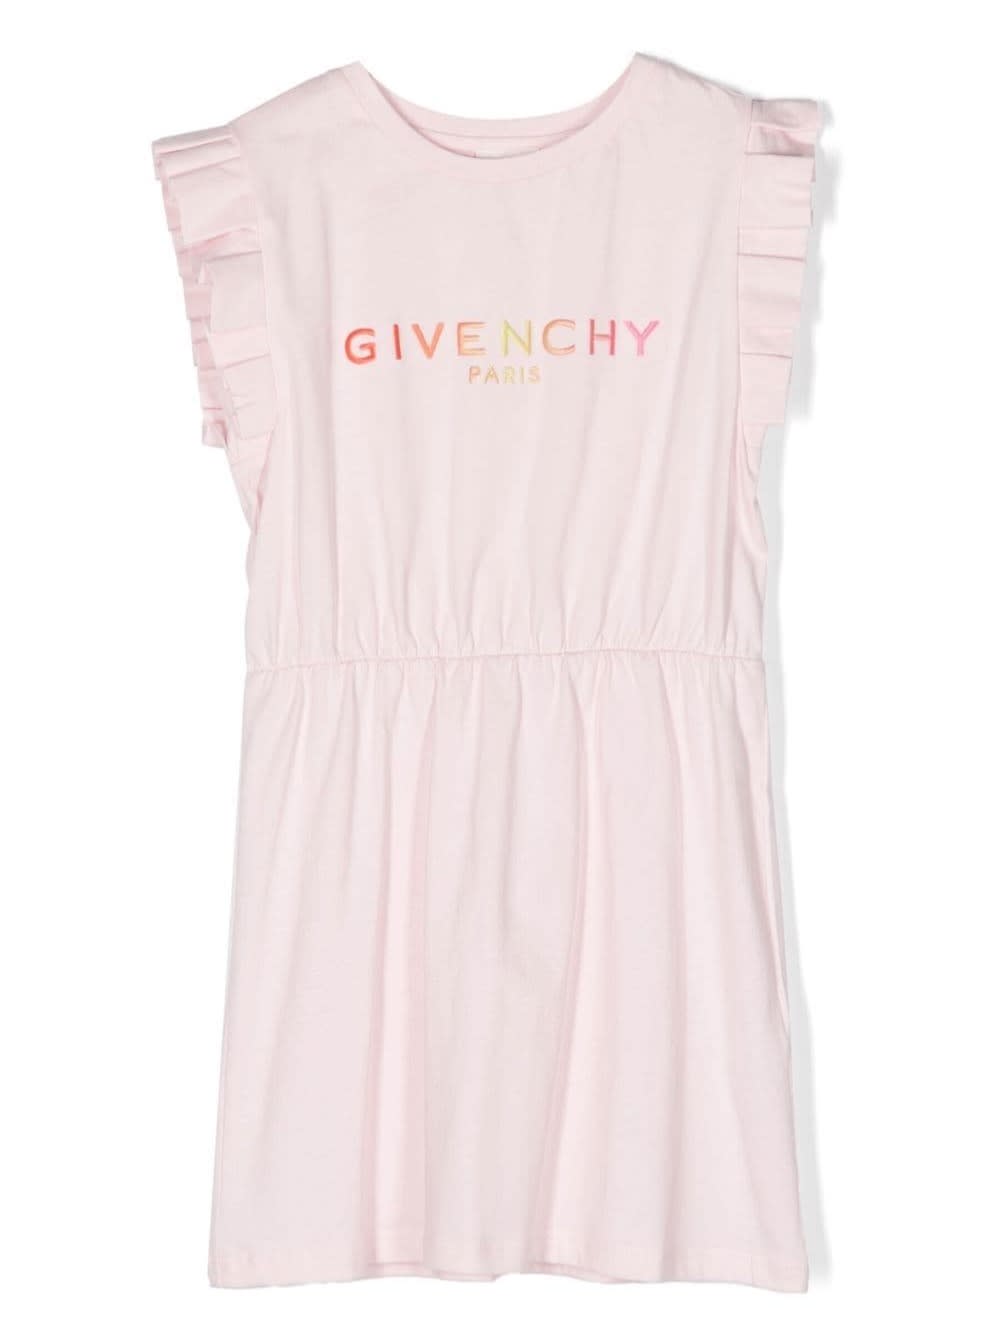 GIVENCHY PINK CREWNECK DRESS WITH LOGO PRINT IN COTTON GIRL